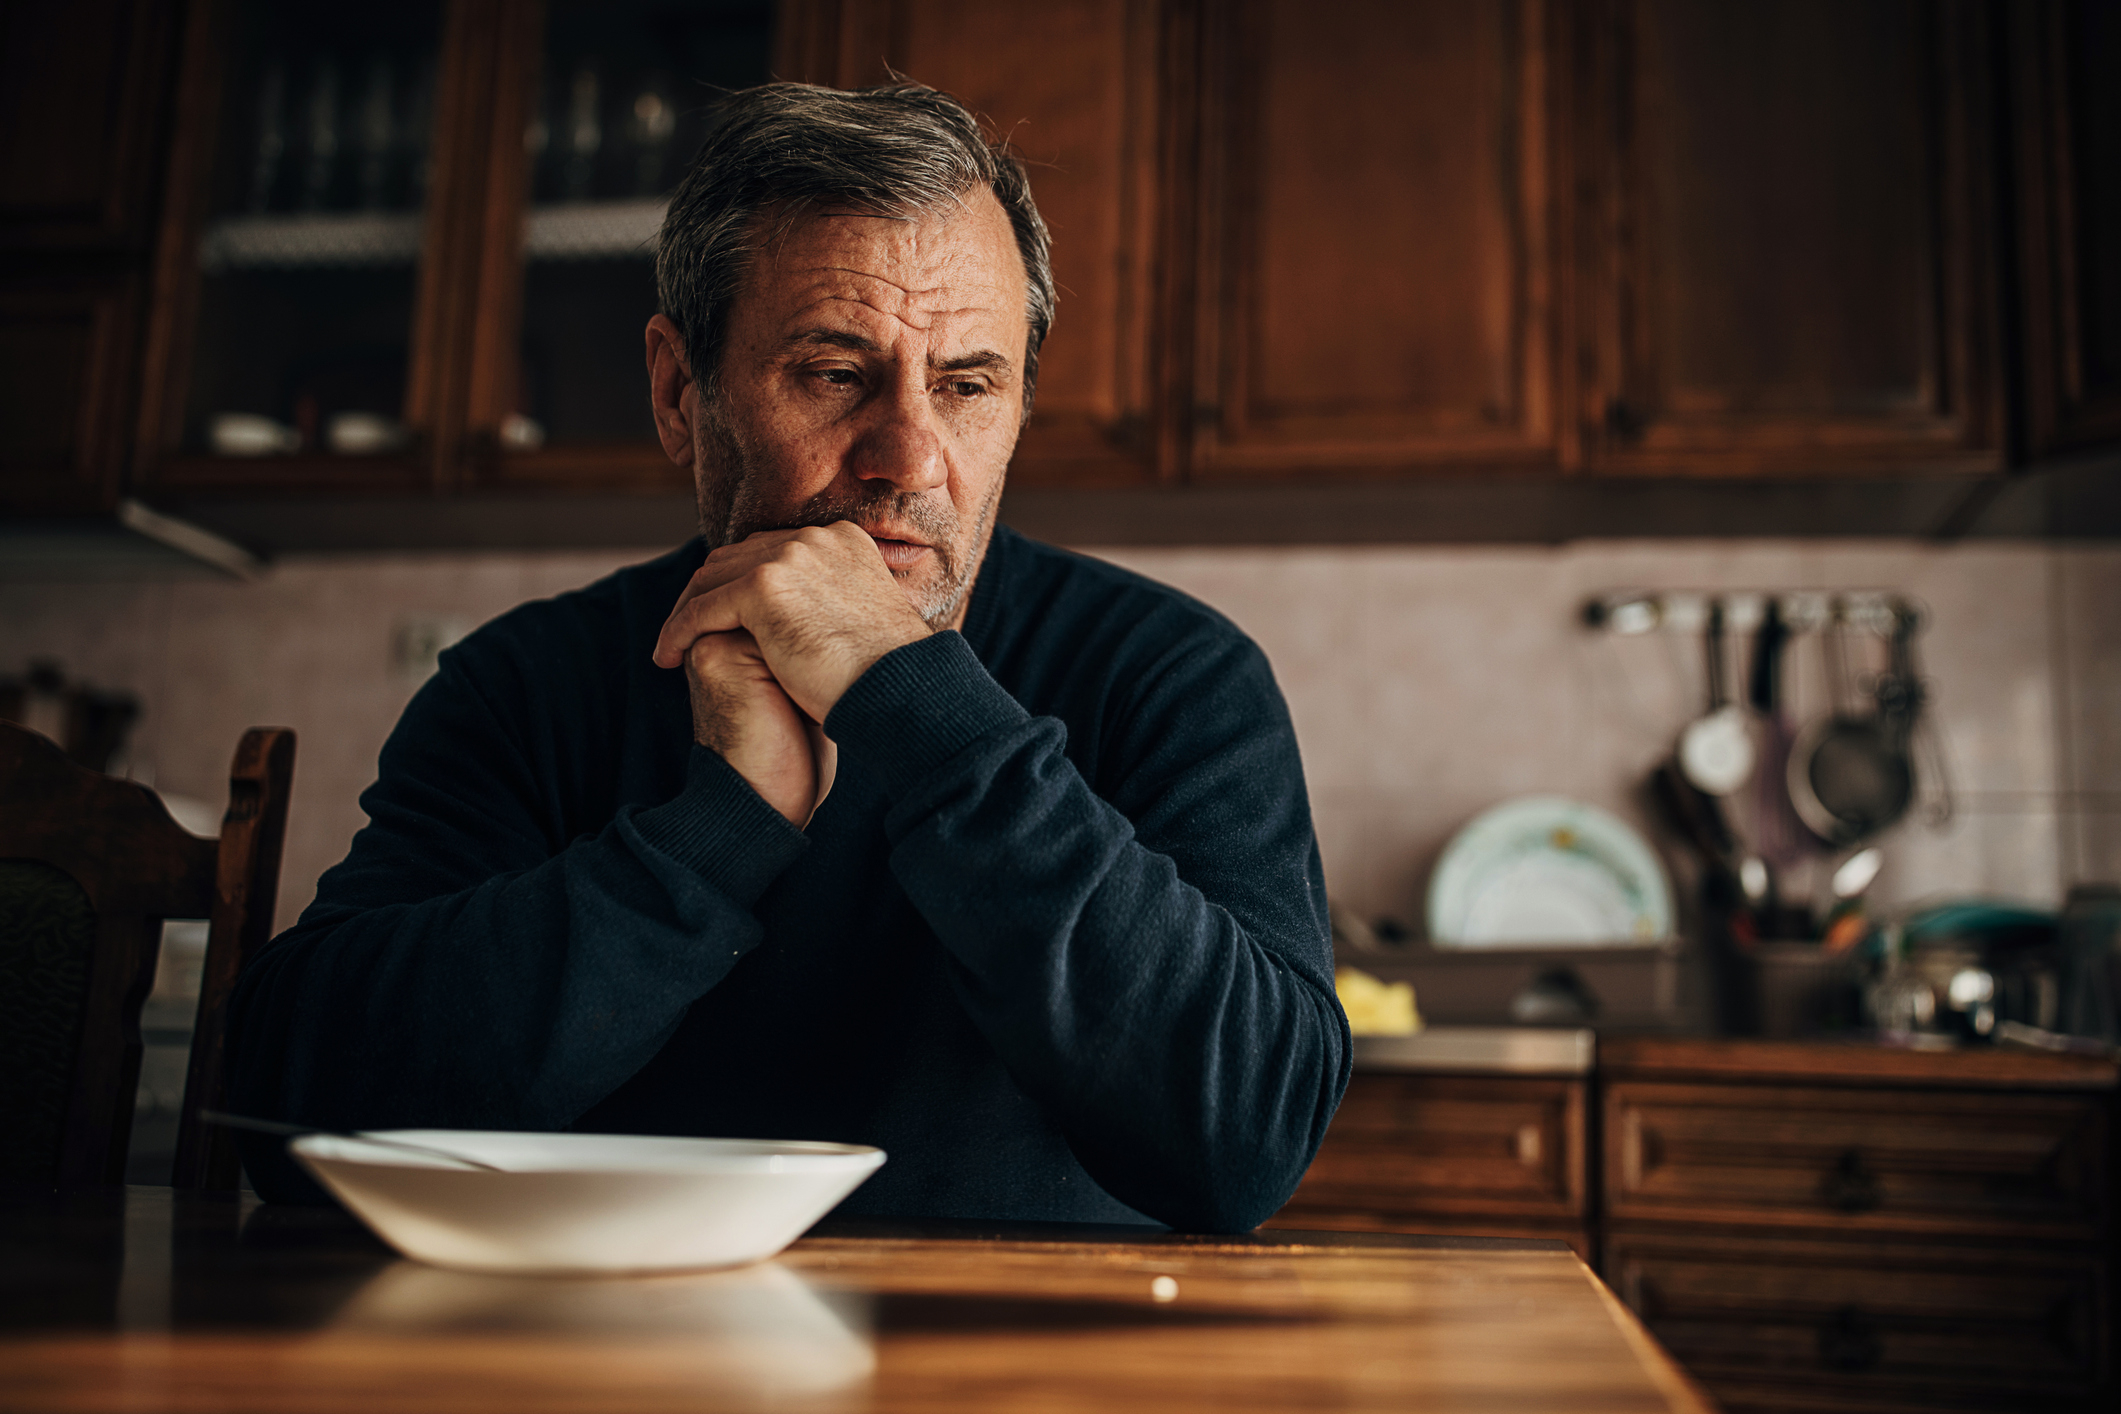 man in the kitchen staring off in thought